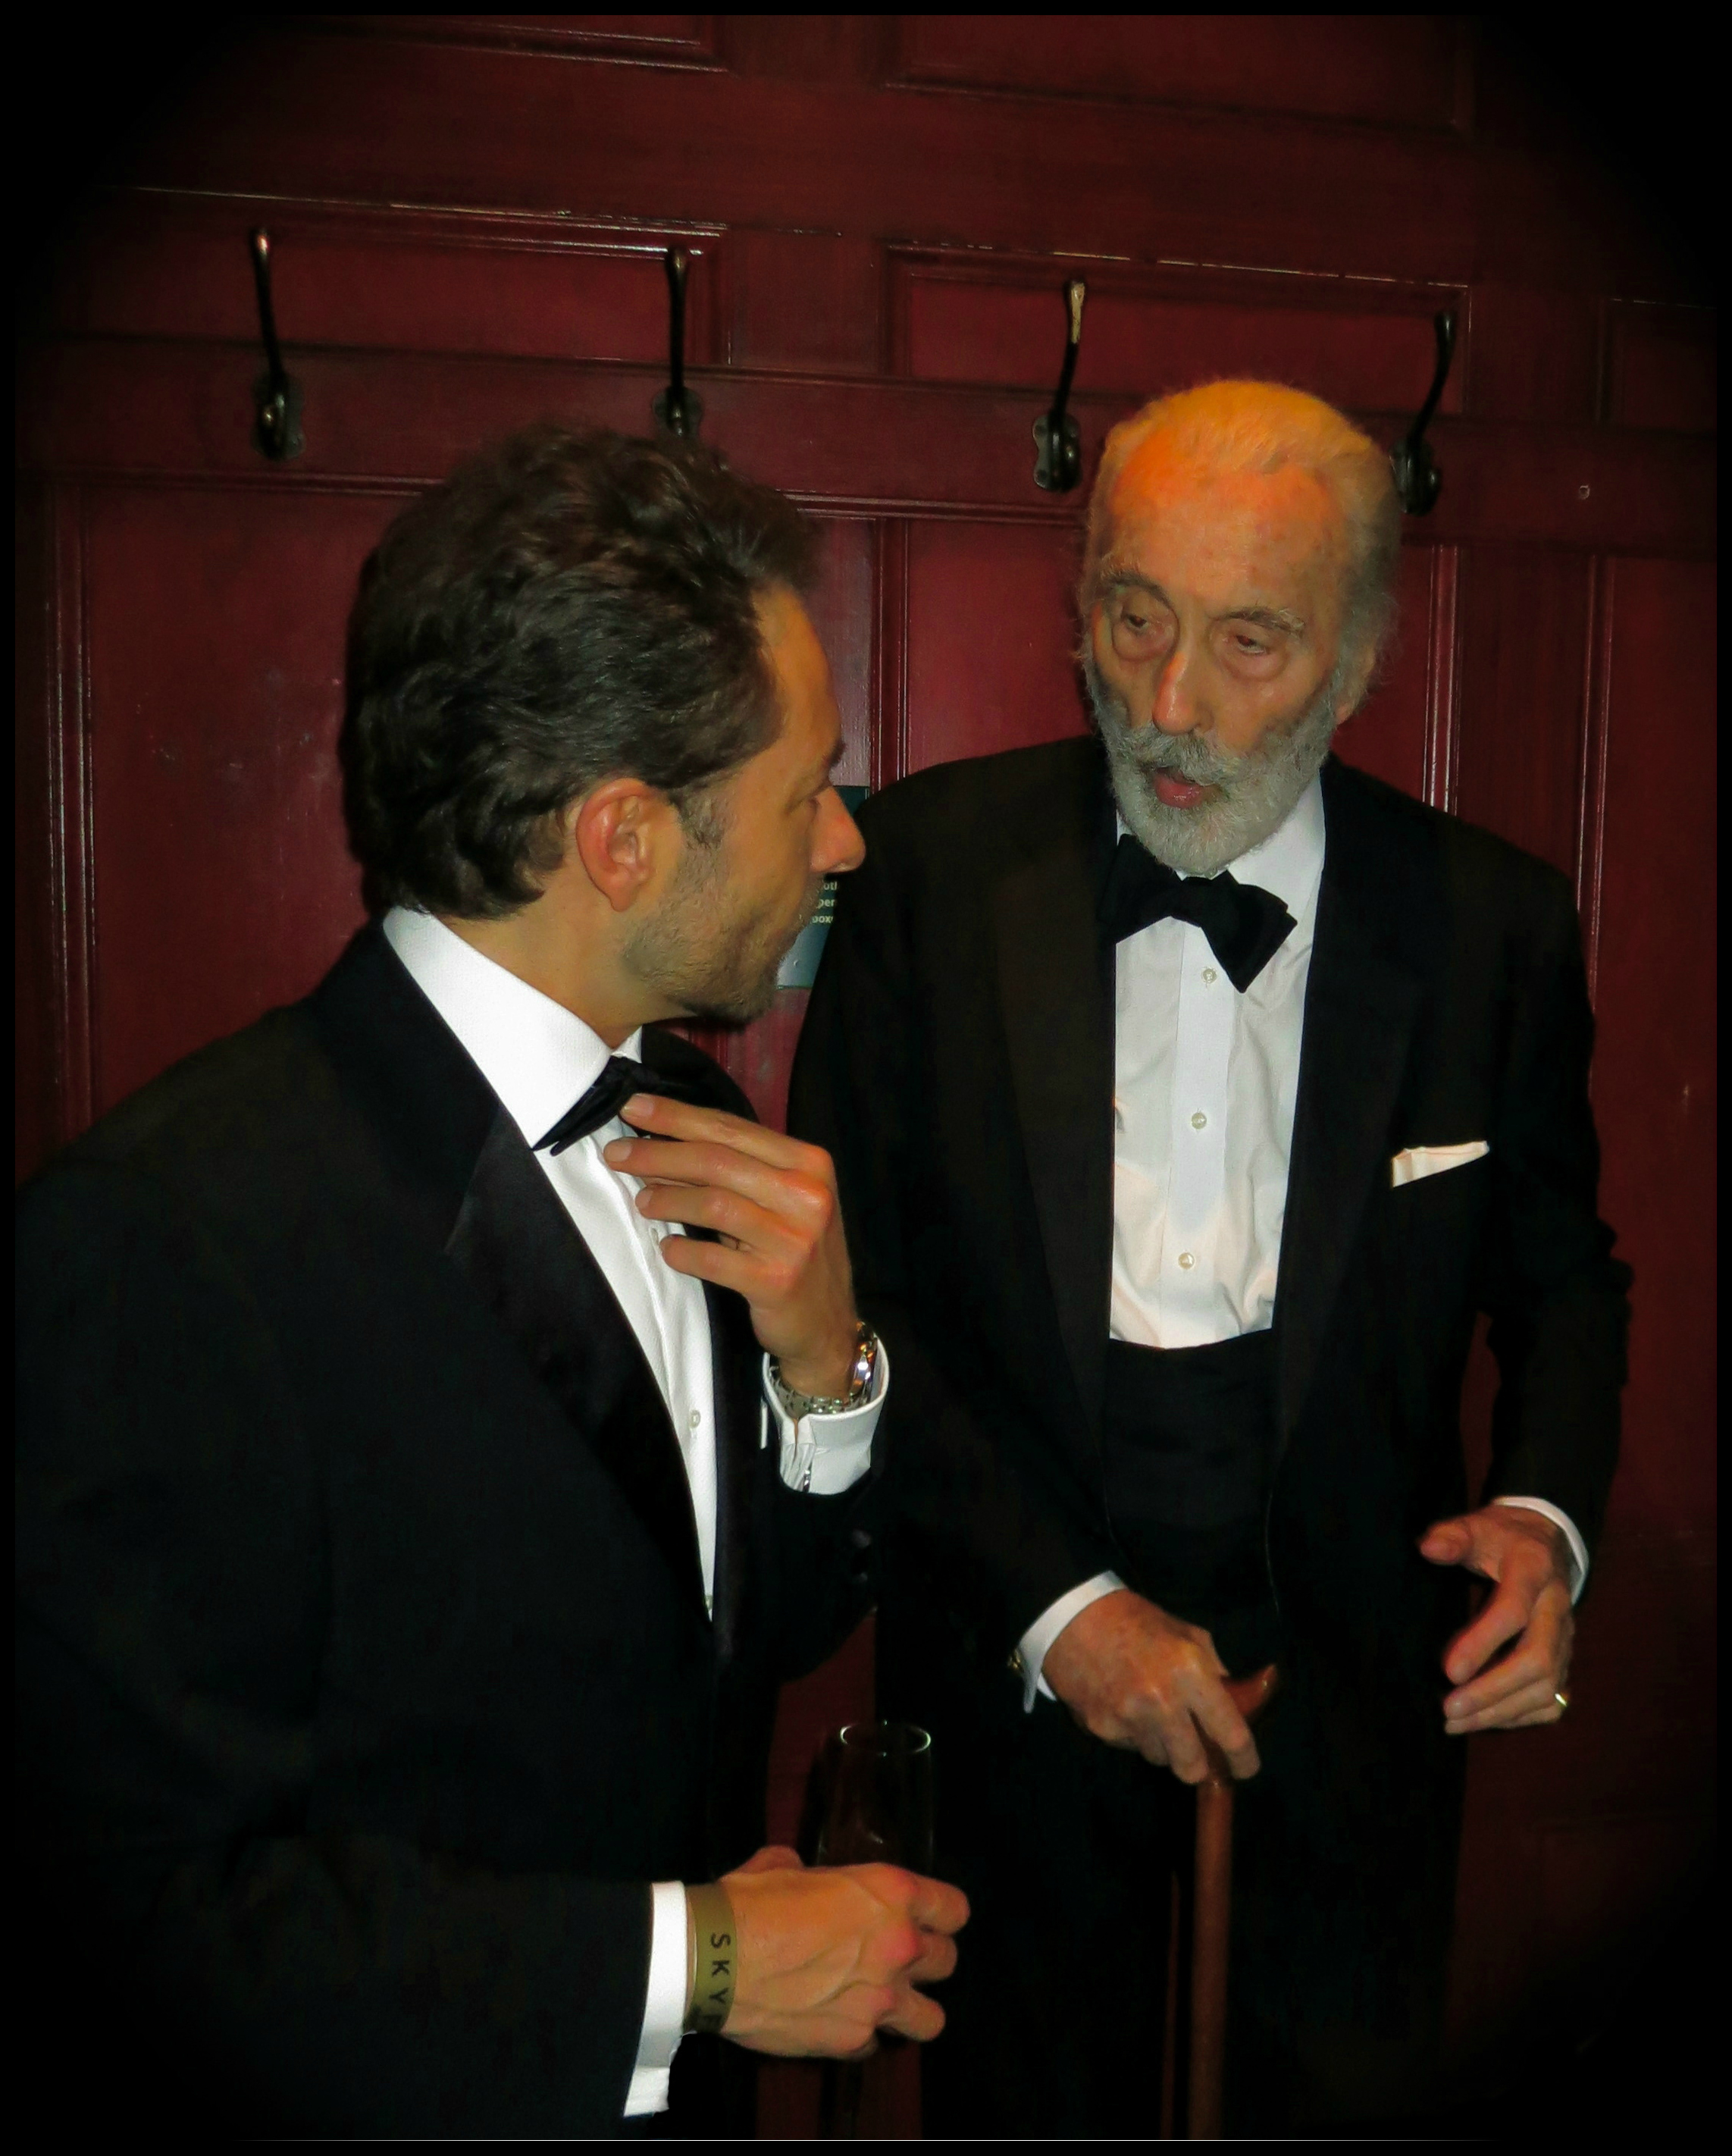 Sir Christopher Lee and David Giammarco, 